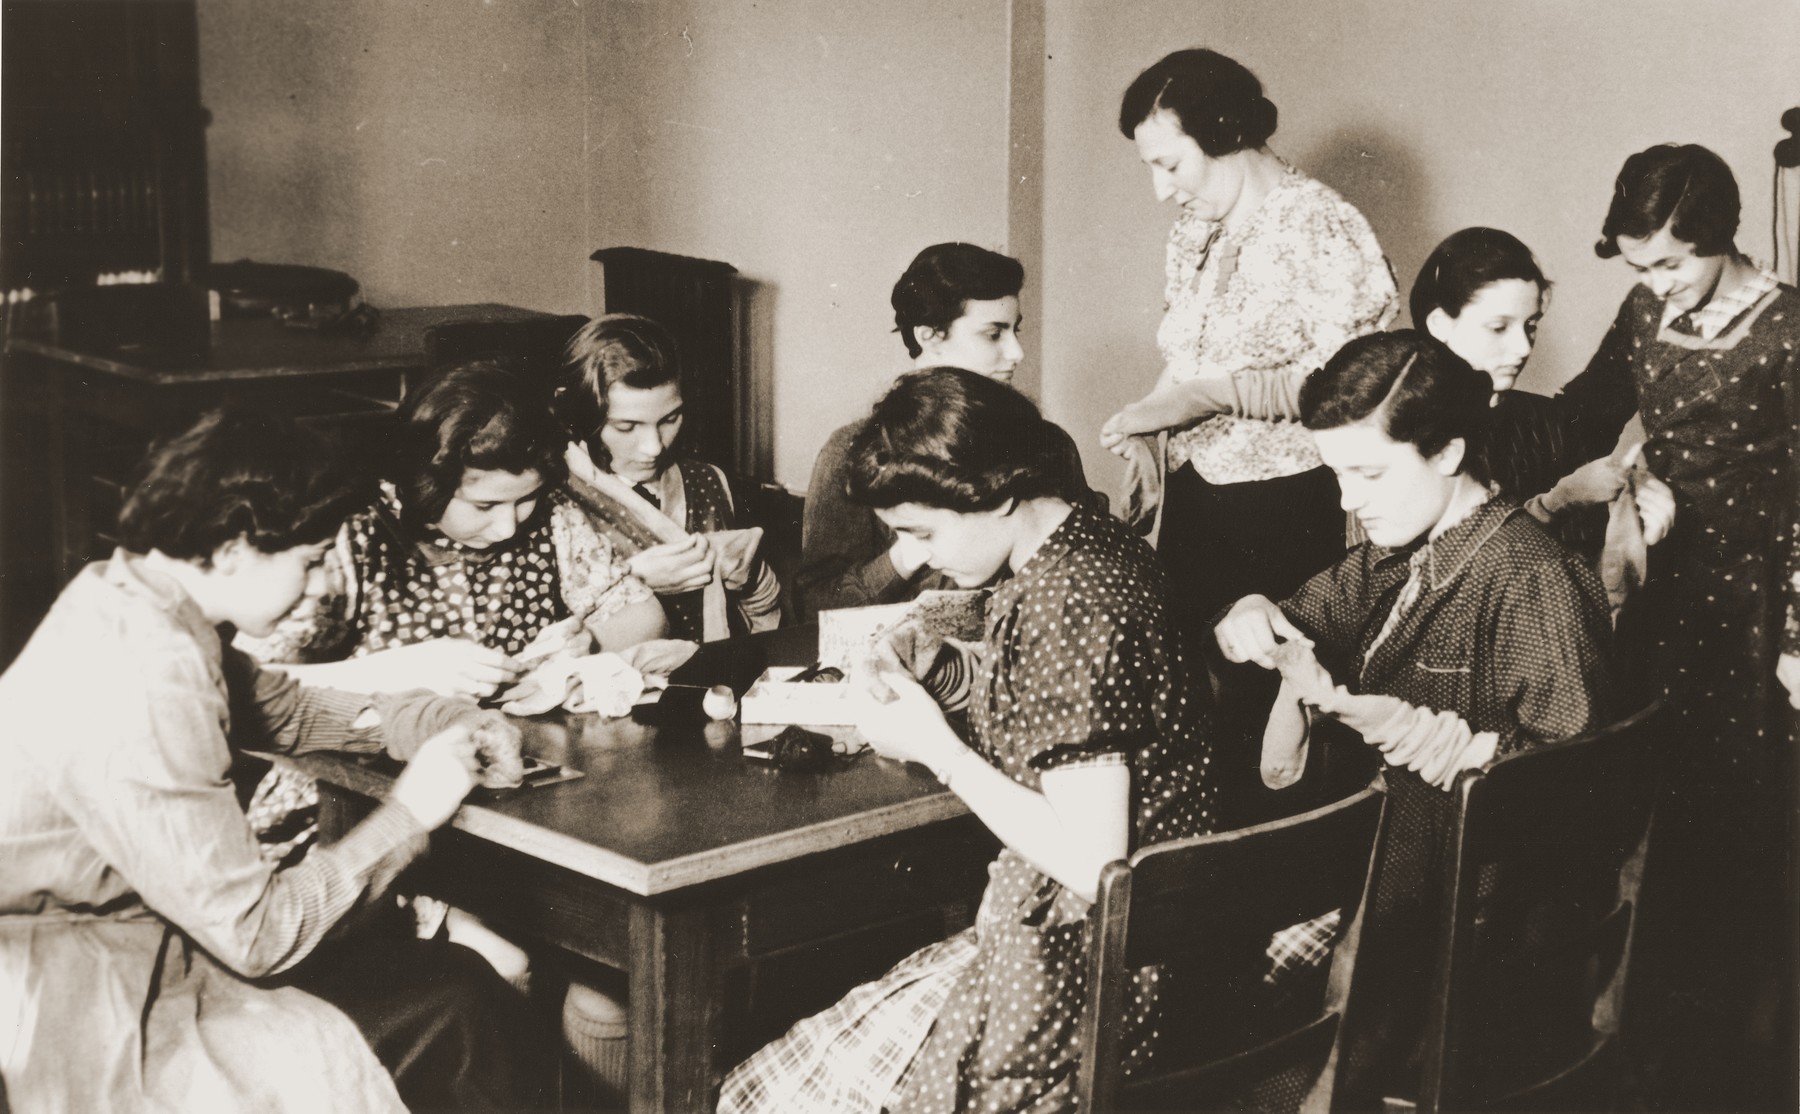 Teenage girls darn socks for the boys of the Baruch Auerbach Jewish orphanage in Berlin.

Margot Peretz is pictured in the front, right.